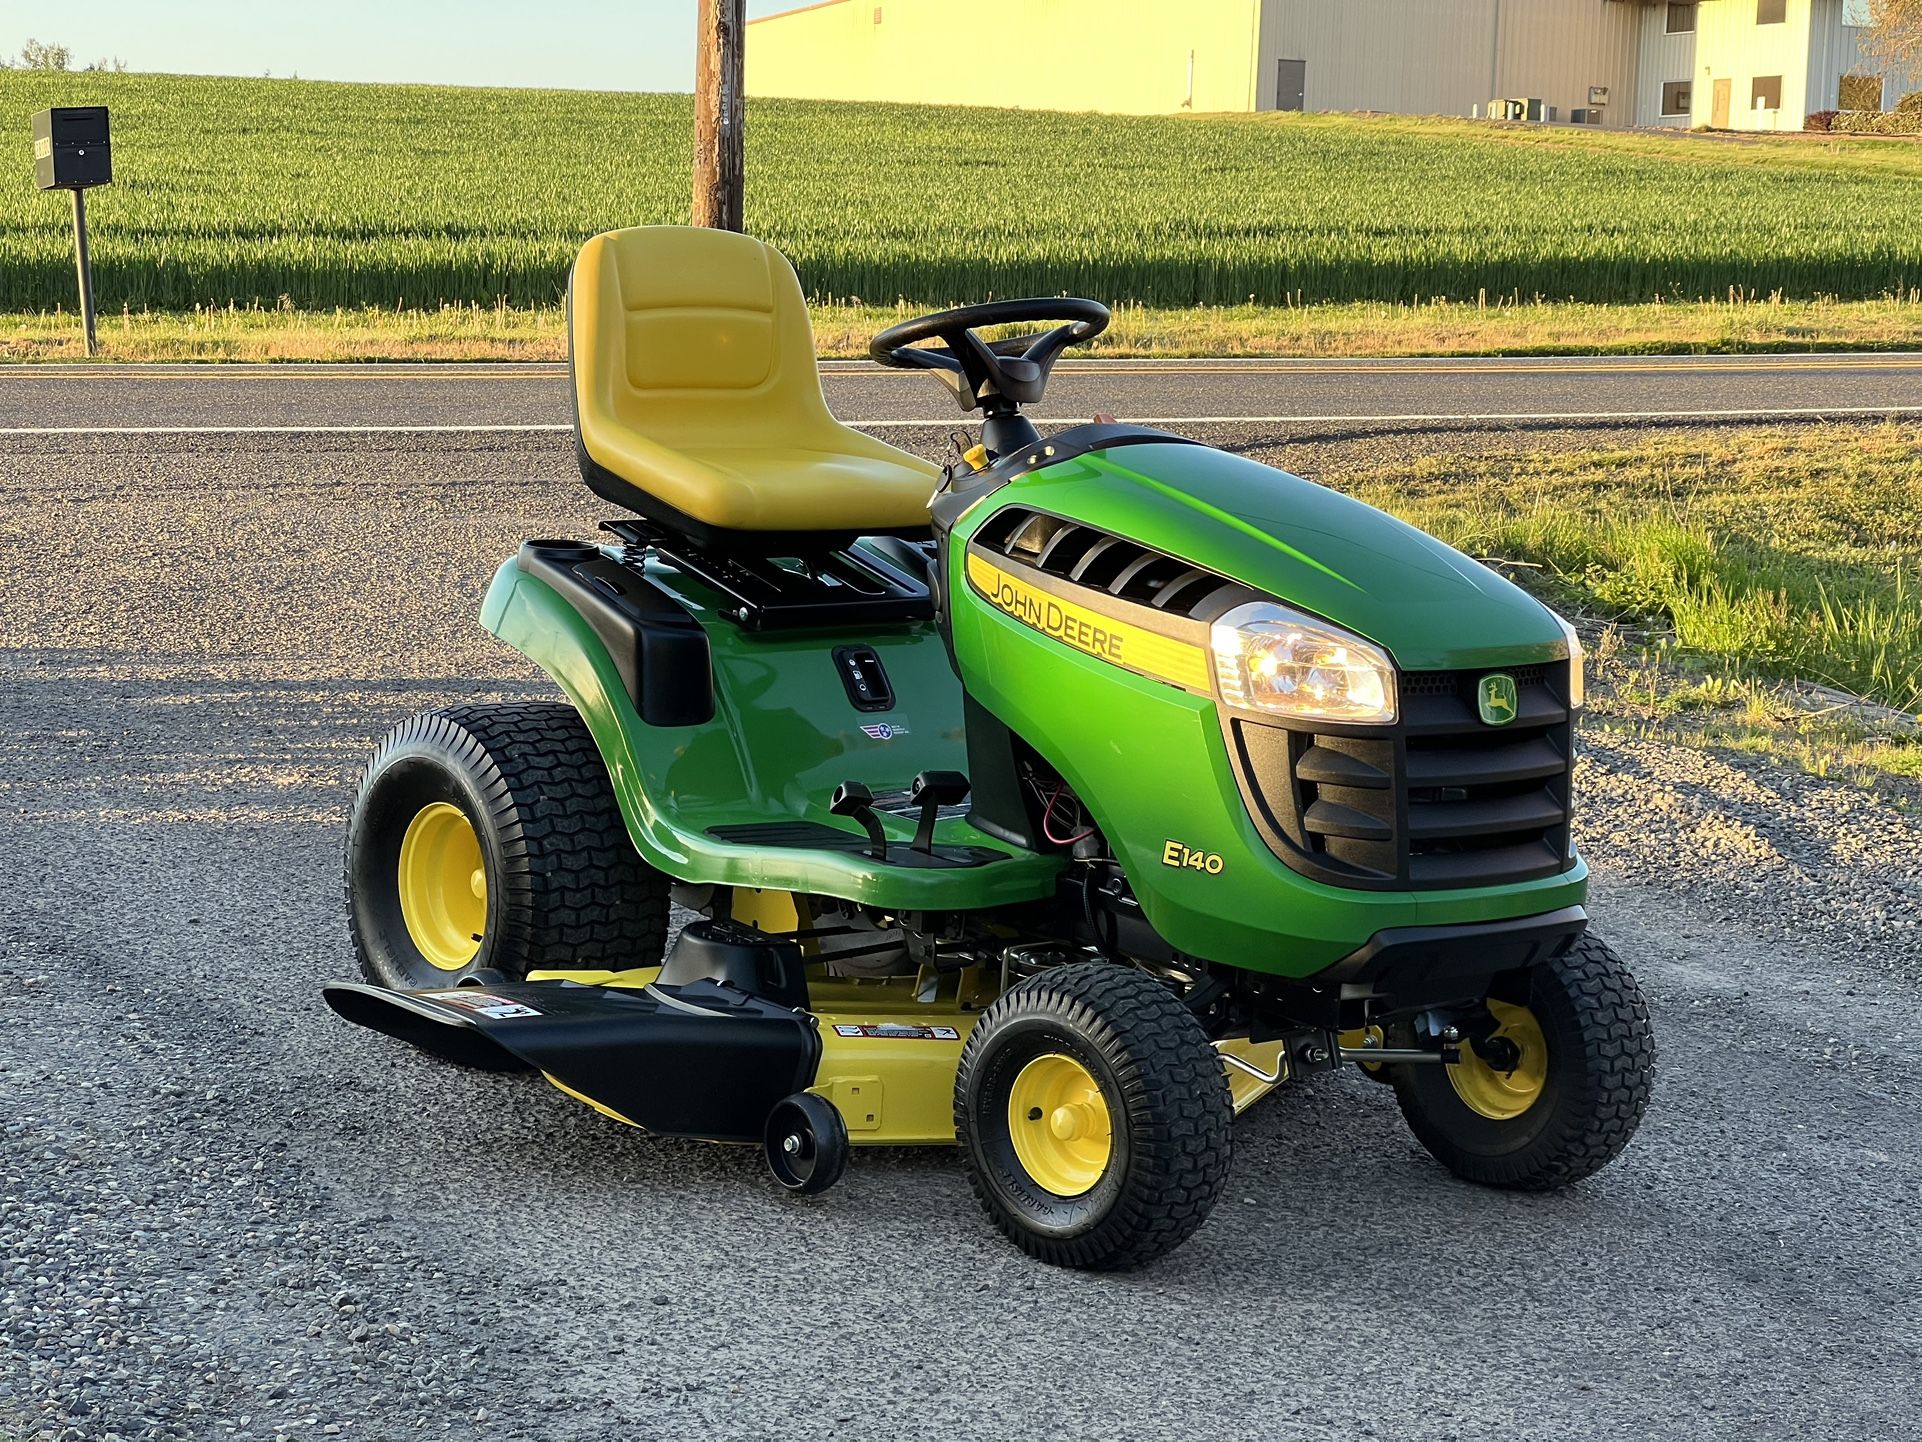 John Deere E140 Riding Lawn Mower Tractor 48” Deck Auto 22HP 60hrs Bagger Available